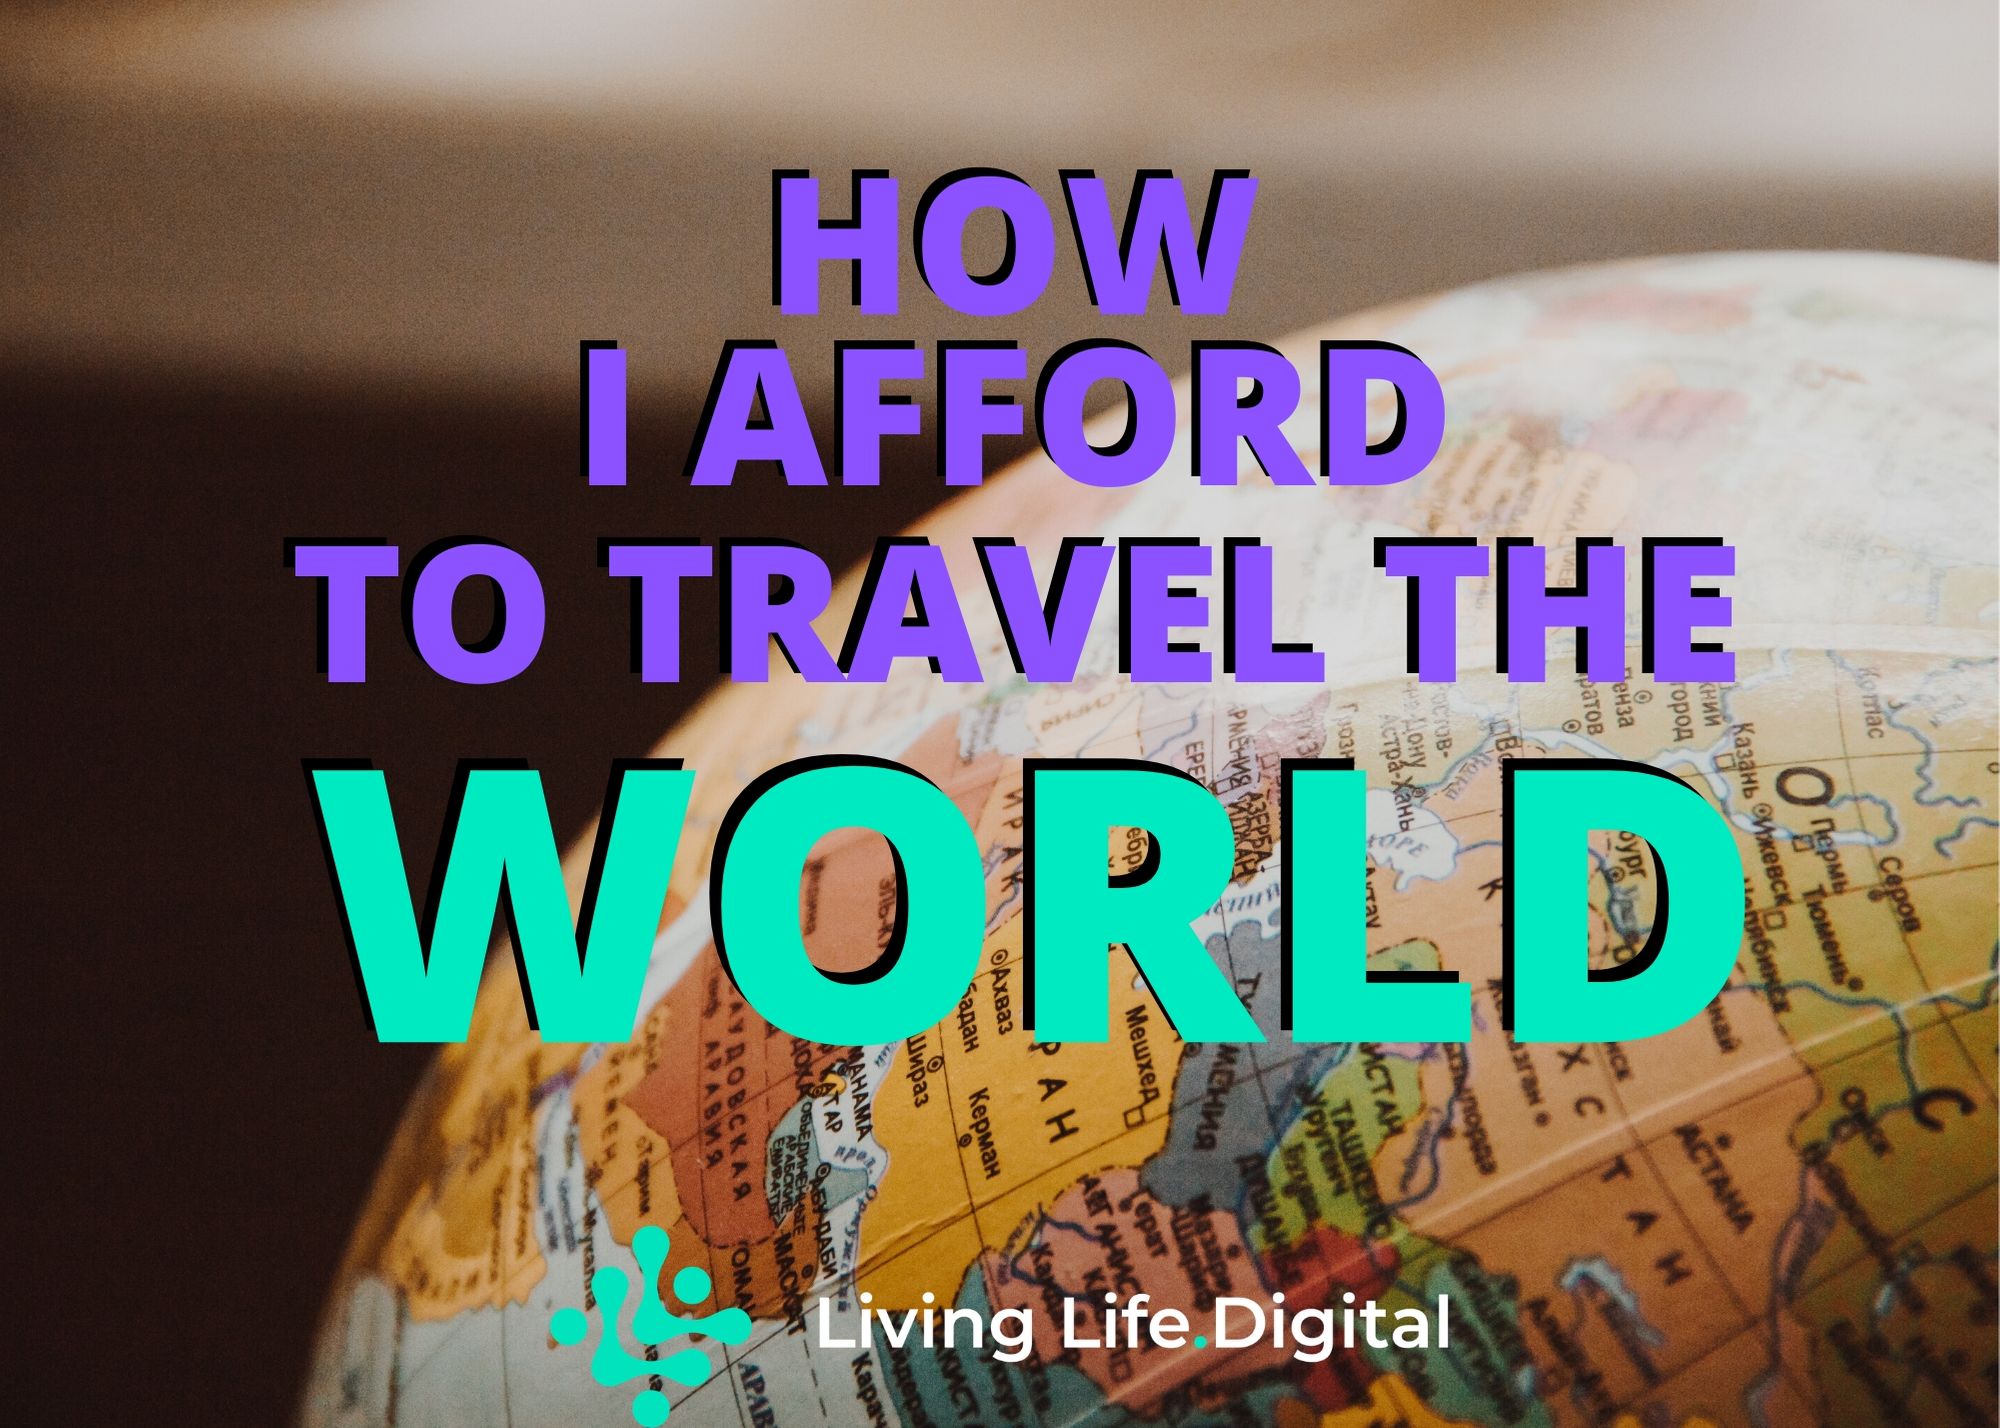 How I afford to Travel the World